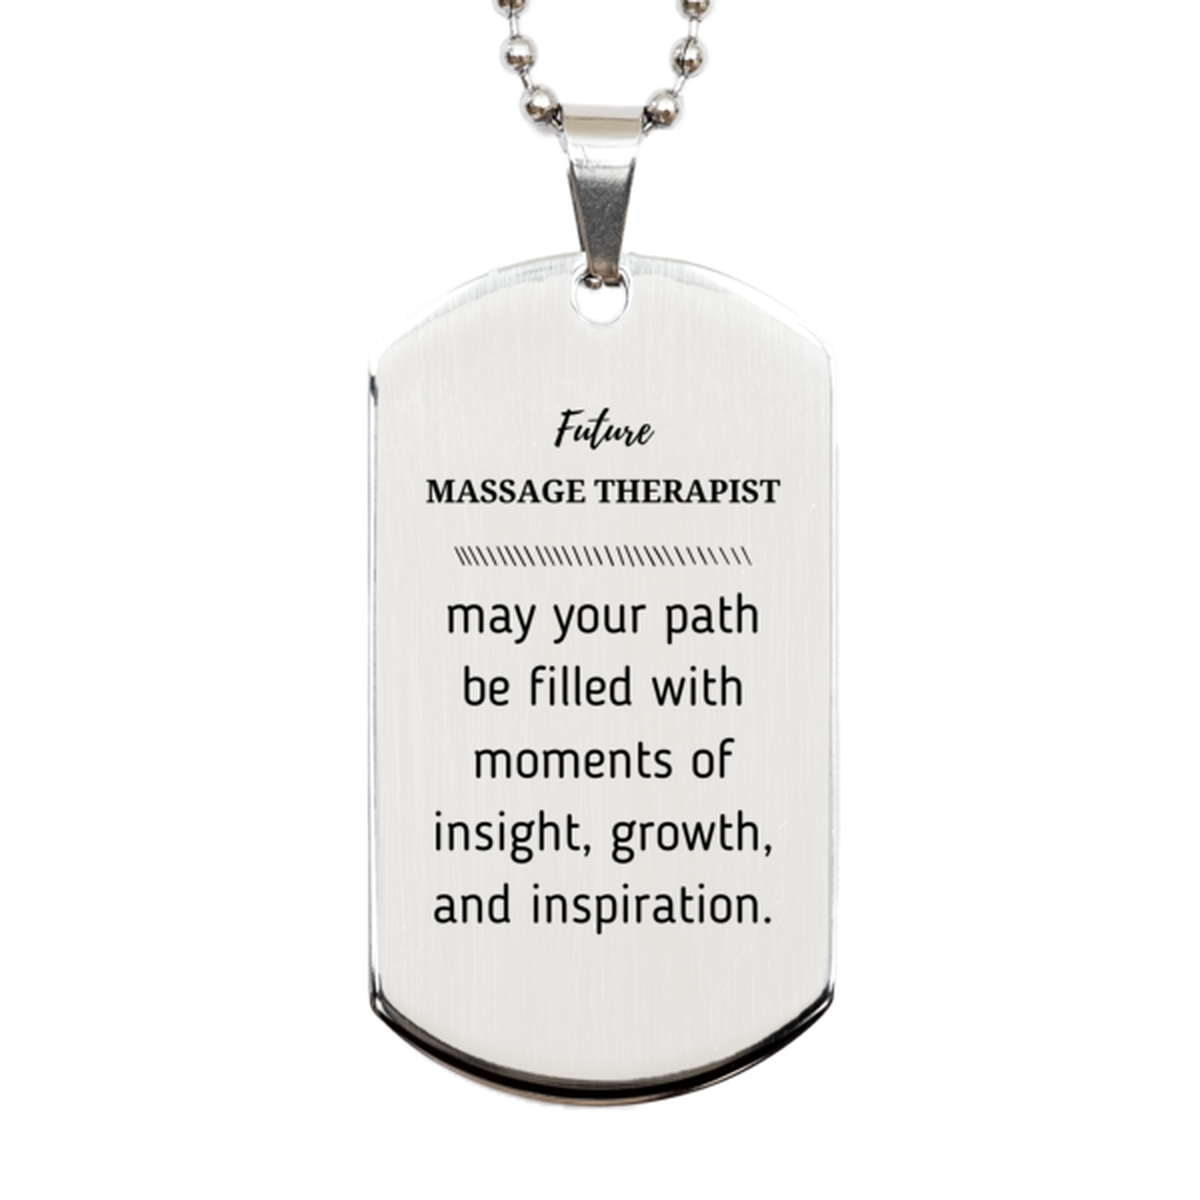 Future Massage Therapist Gifts, May your path be filled with moments of insight, Graduation Gifts for New Massage Therapist, Christmas Unique Silver Dog Tag For Men, Women, Friends